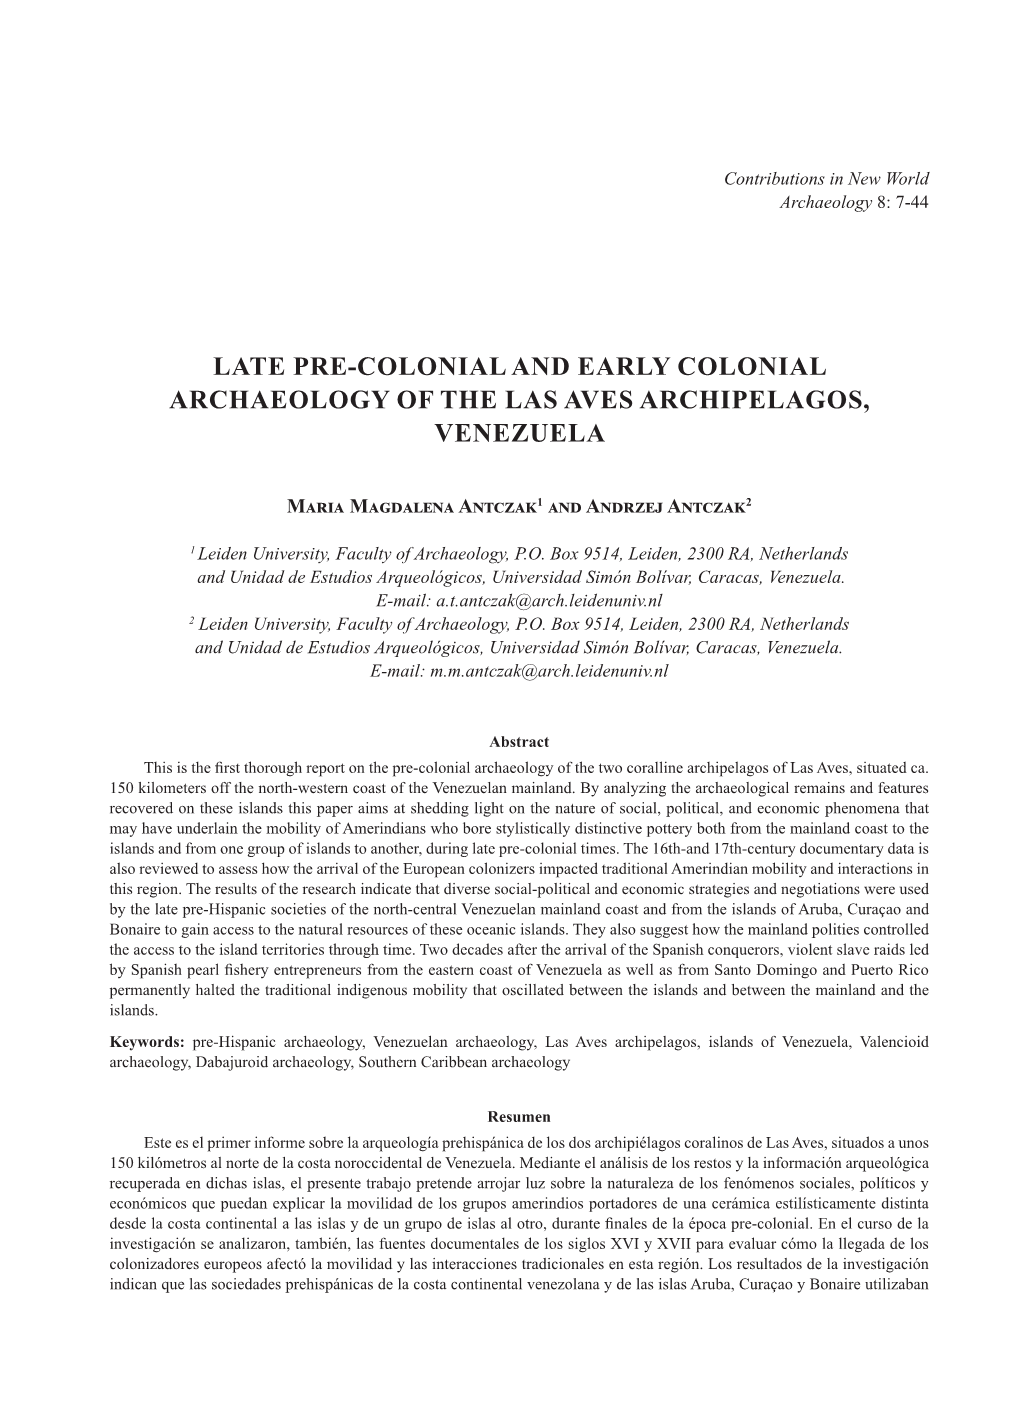 Late Pre-Colonial and Early Colonial Archaeology of the Las Aves Archipelagos, Venezuela